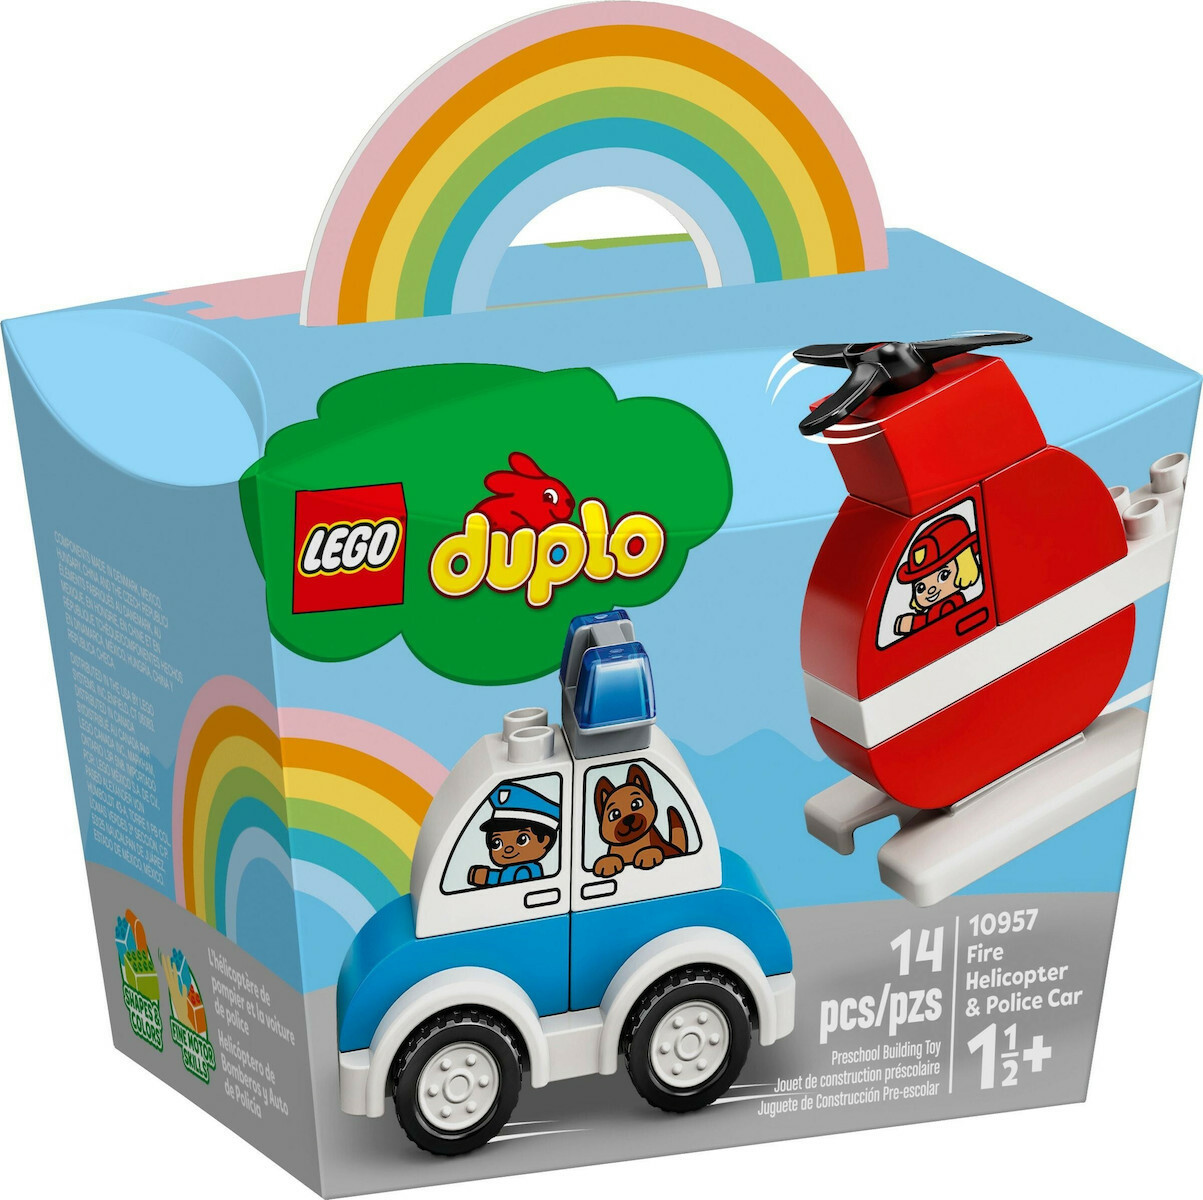 LEGO DUPLO 10957    MEIN ERSTER FIRE HELICOPTER & POLICE CAR